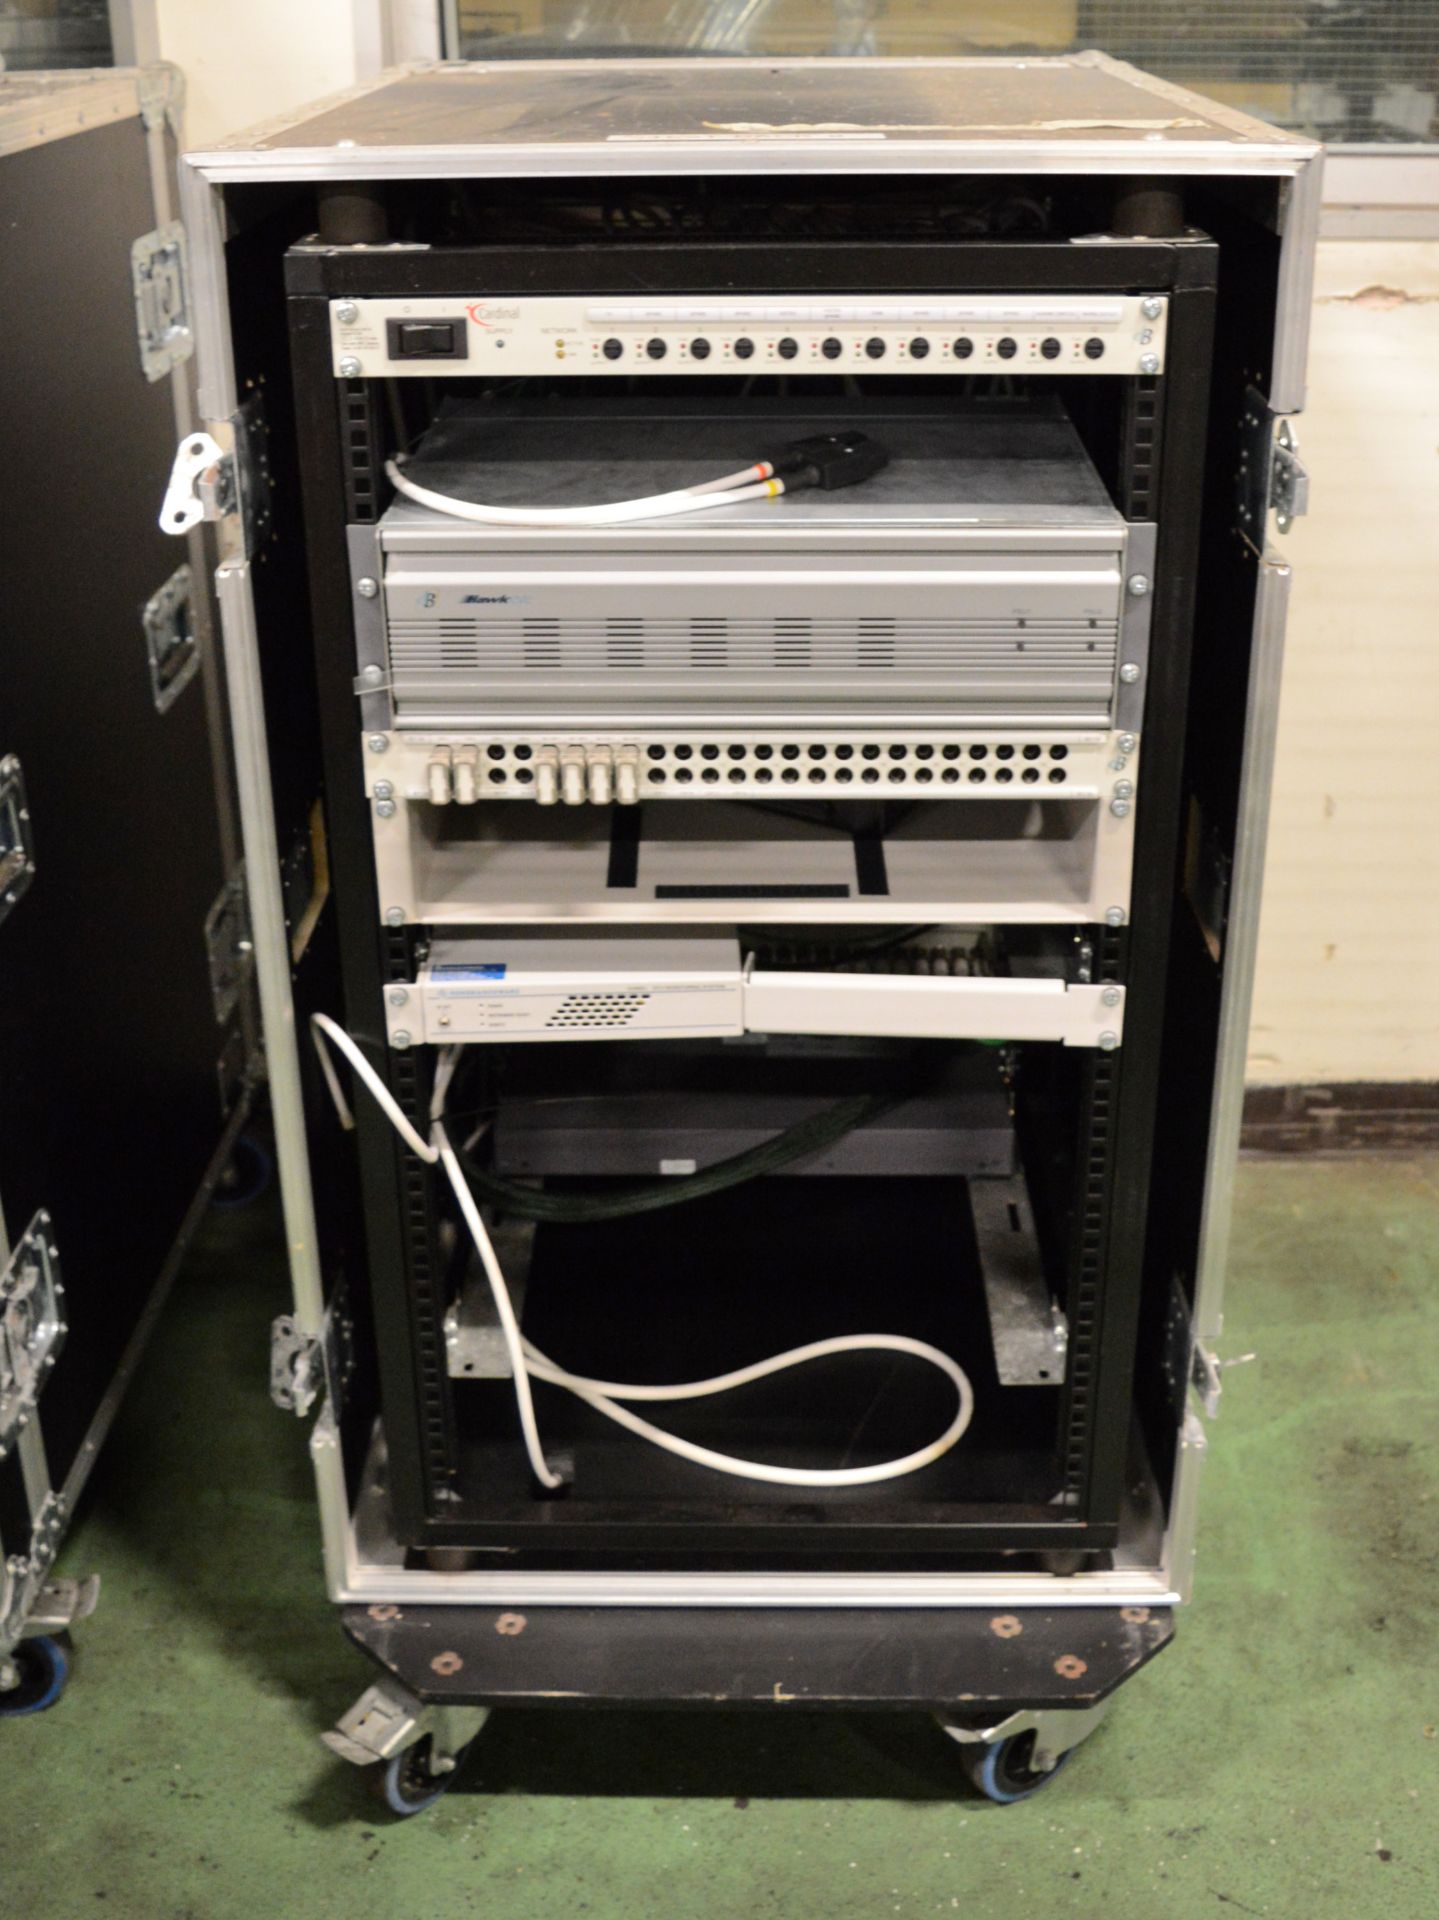 Surveillance / Monitoring System in 2 cases 650x940x1200mm & 700x340x430mm - Contents may - Image 2 of 3